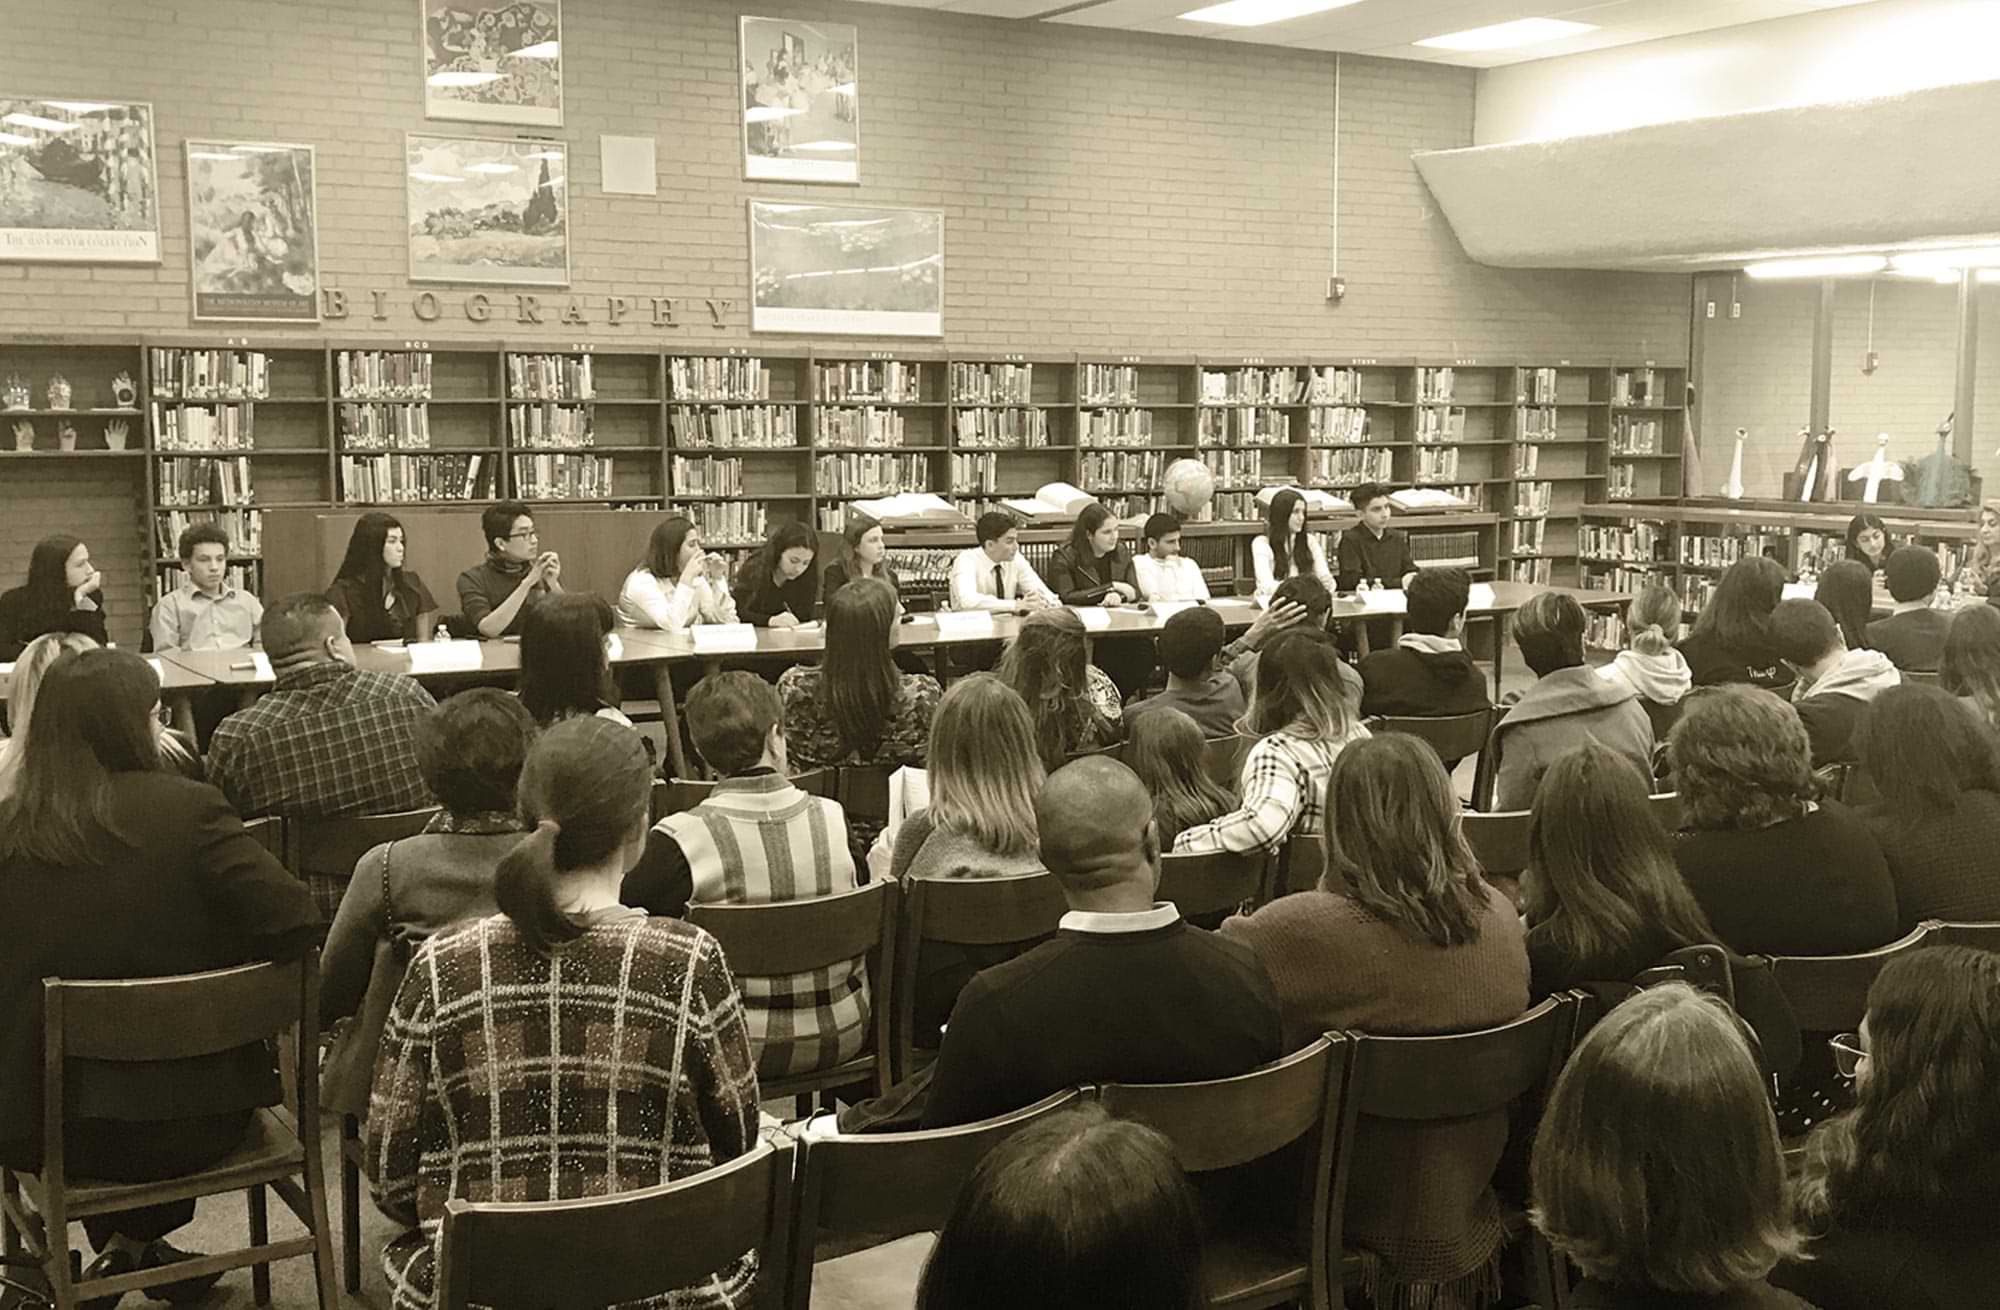 a student voice panel in session in a library